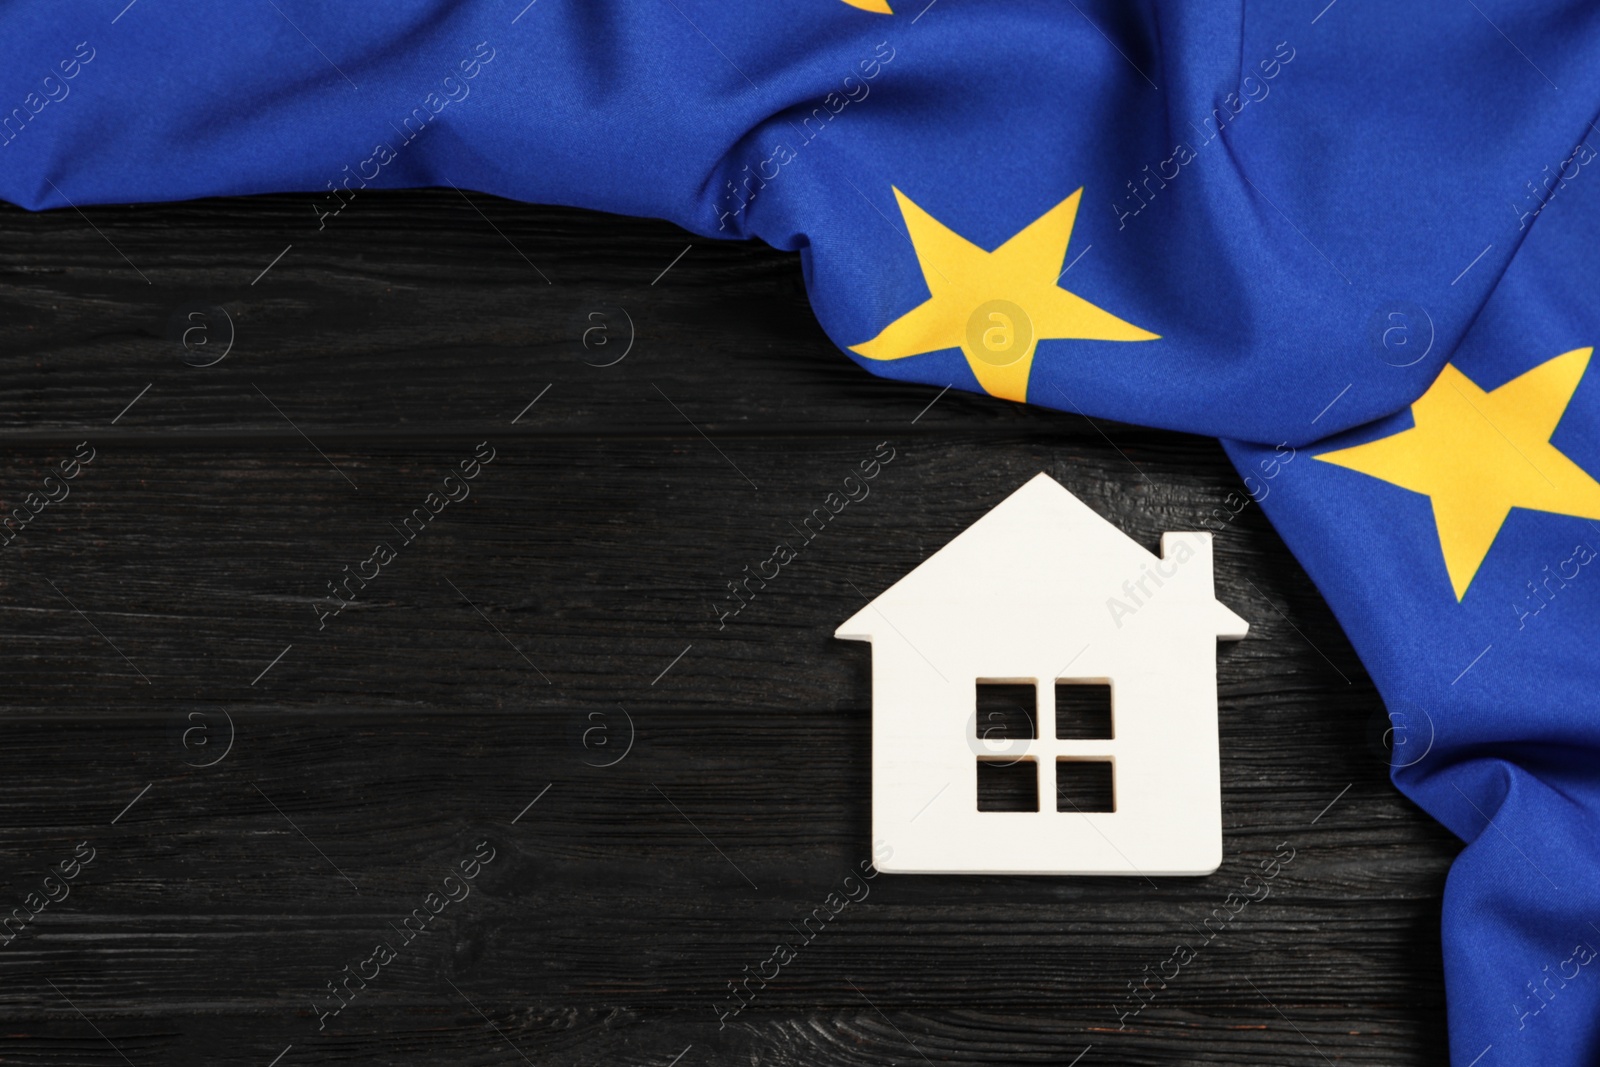 Photo of House model and flag of European Union on black wooden table, flat lay. Space for text